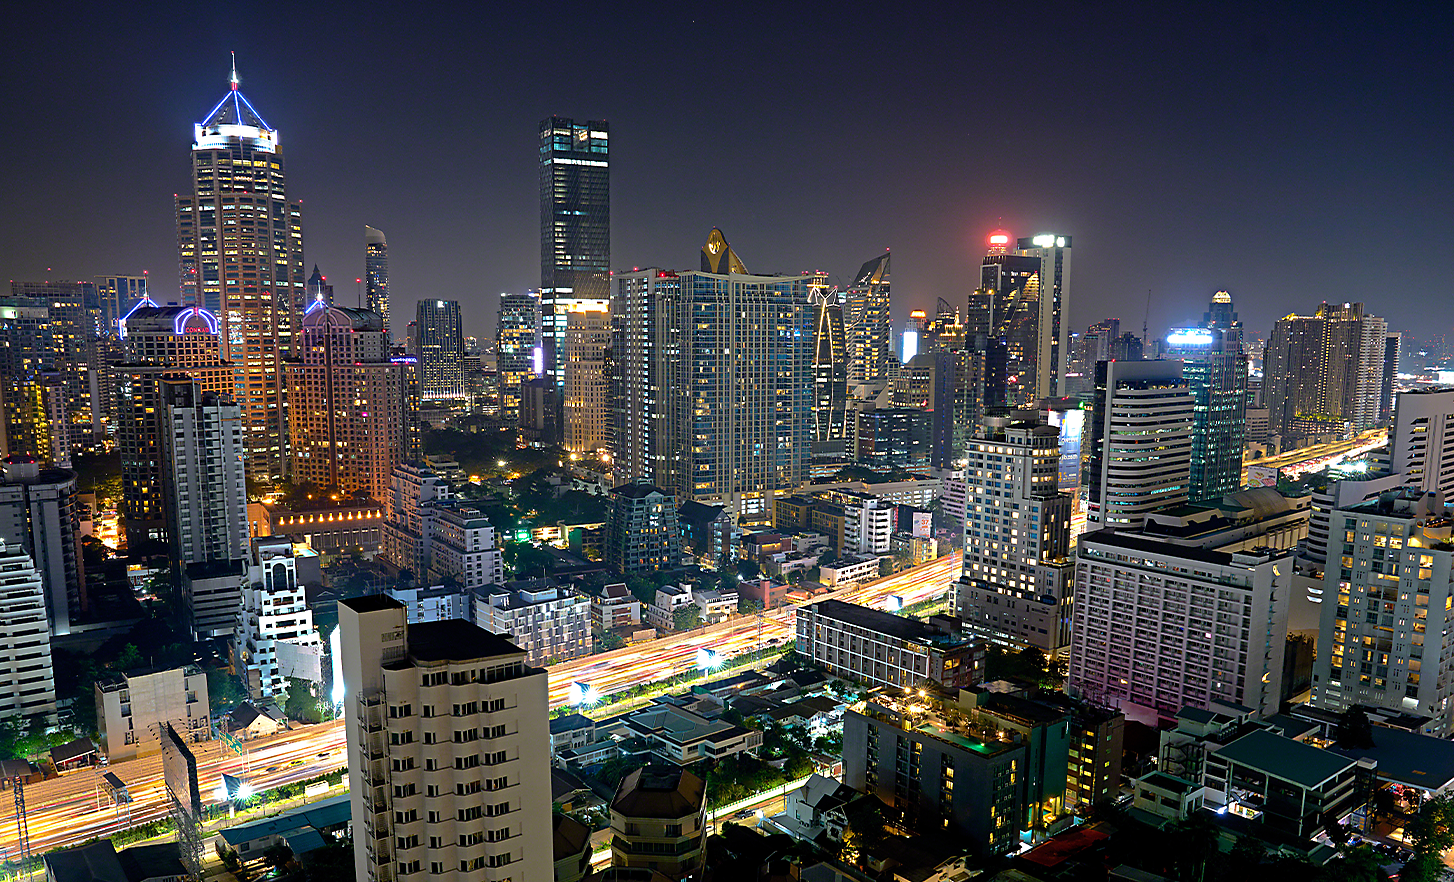 A cityscape at night, photographed from an elevated position